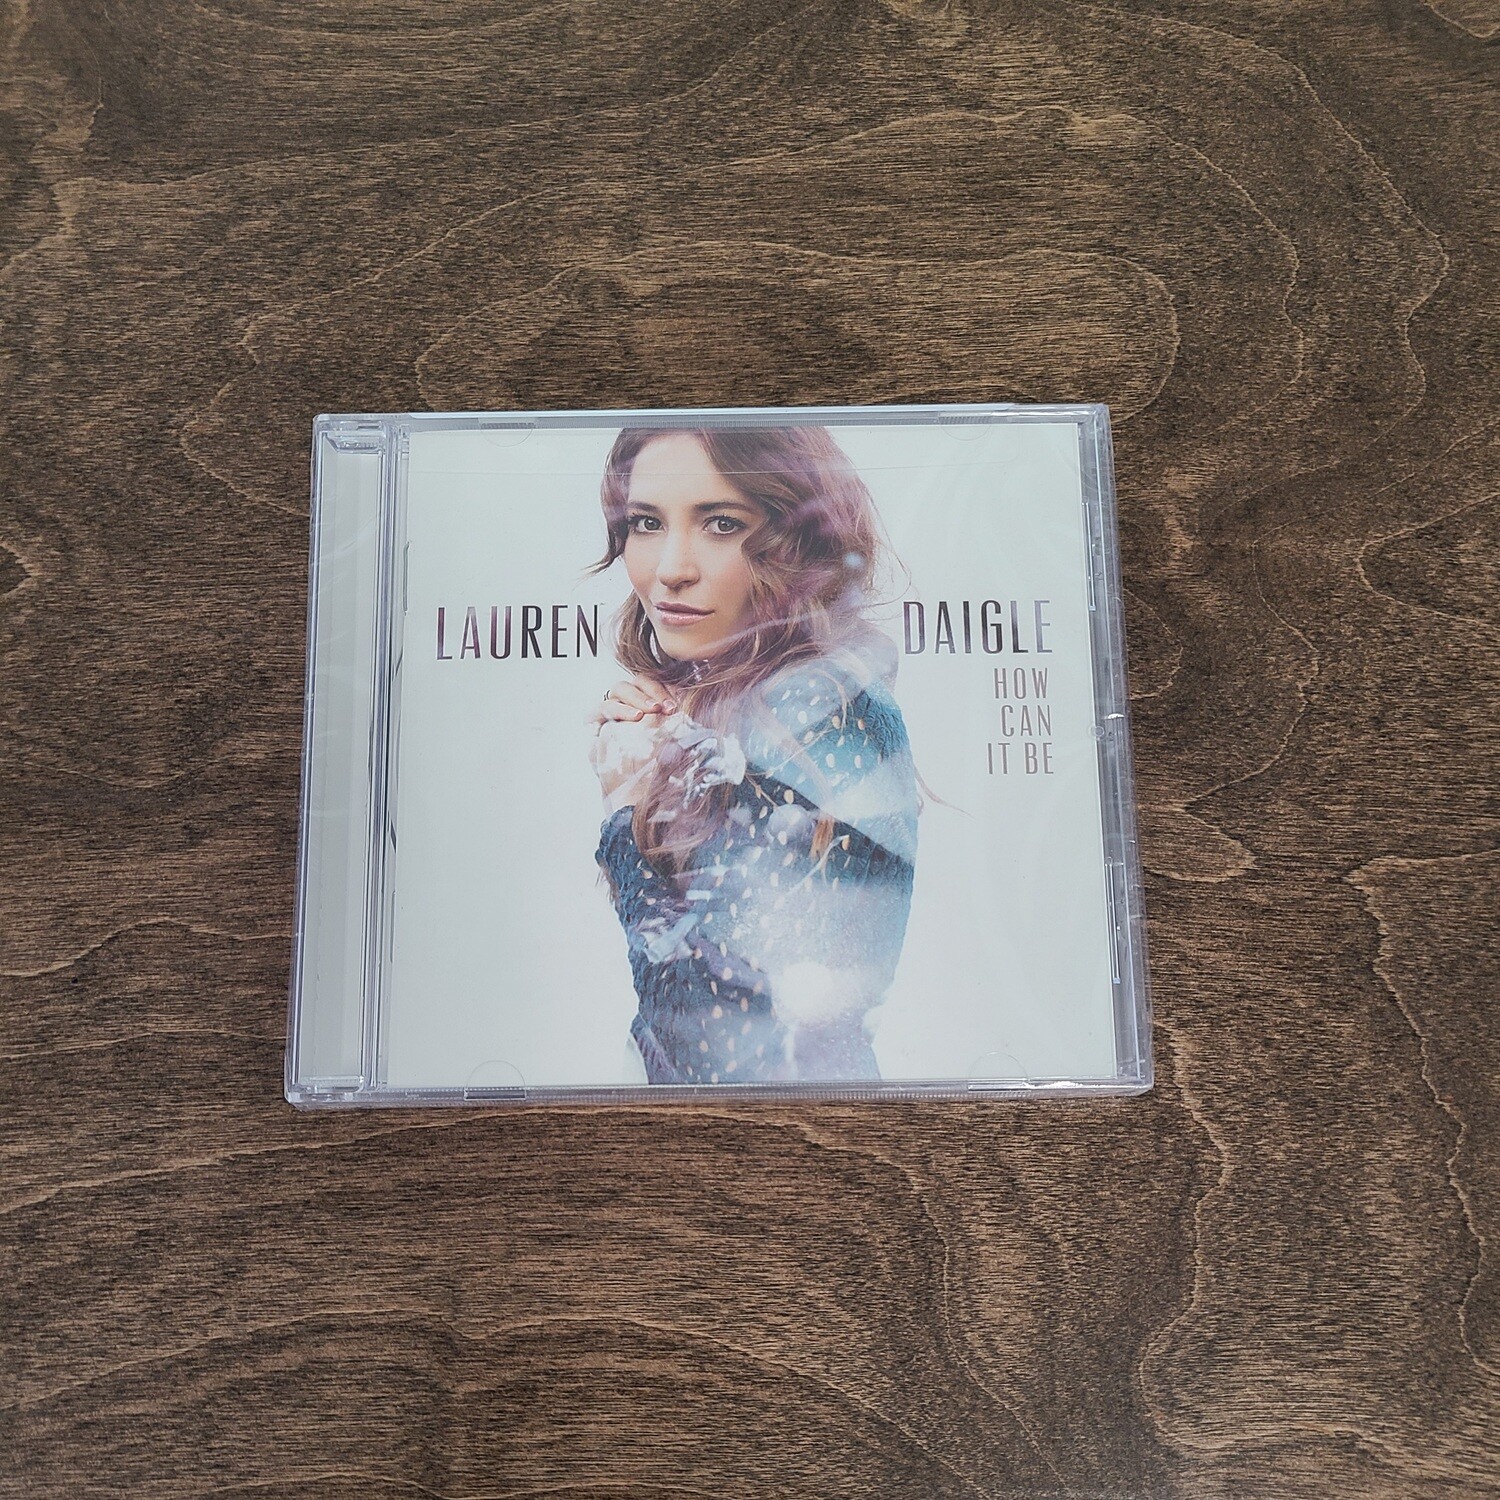 How Can It Be? by Lauren Daigle CD